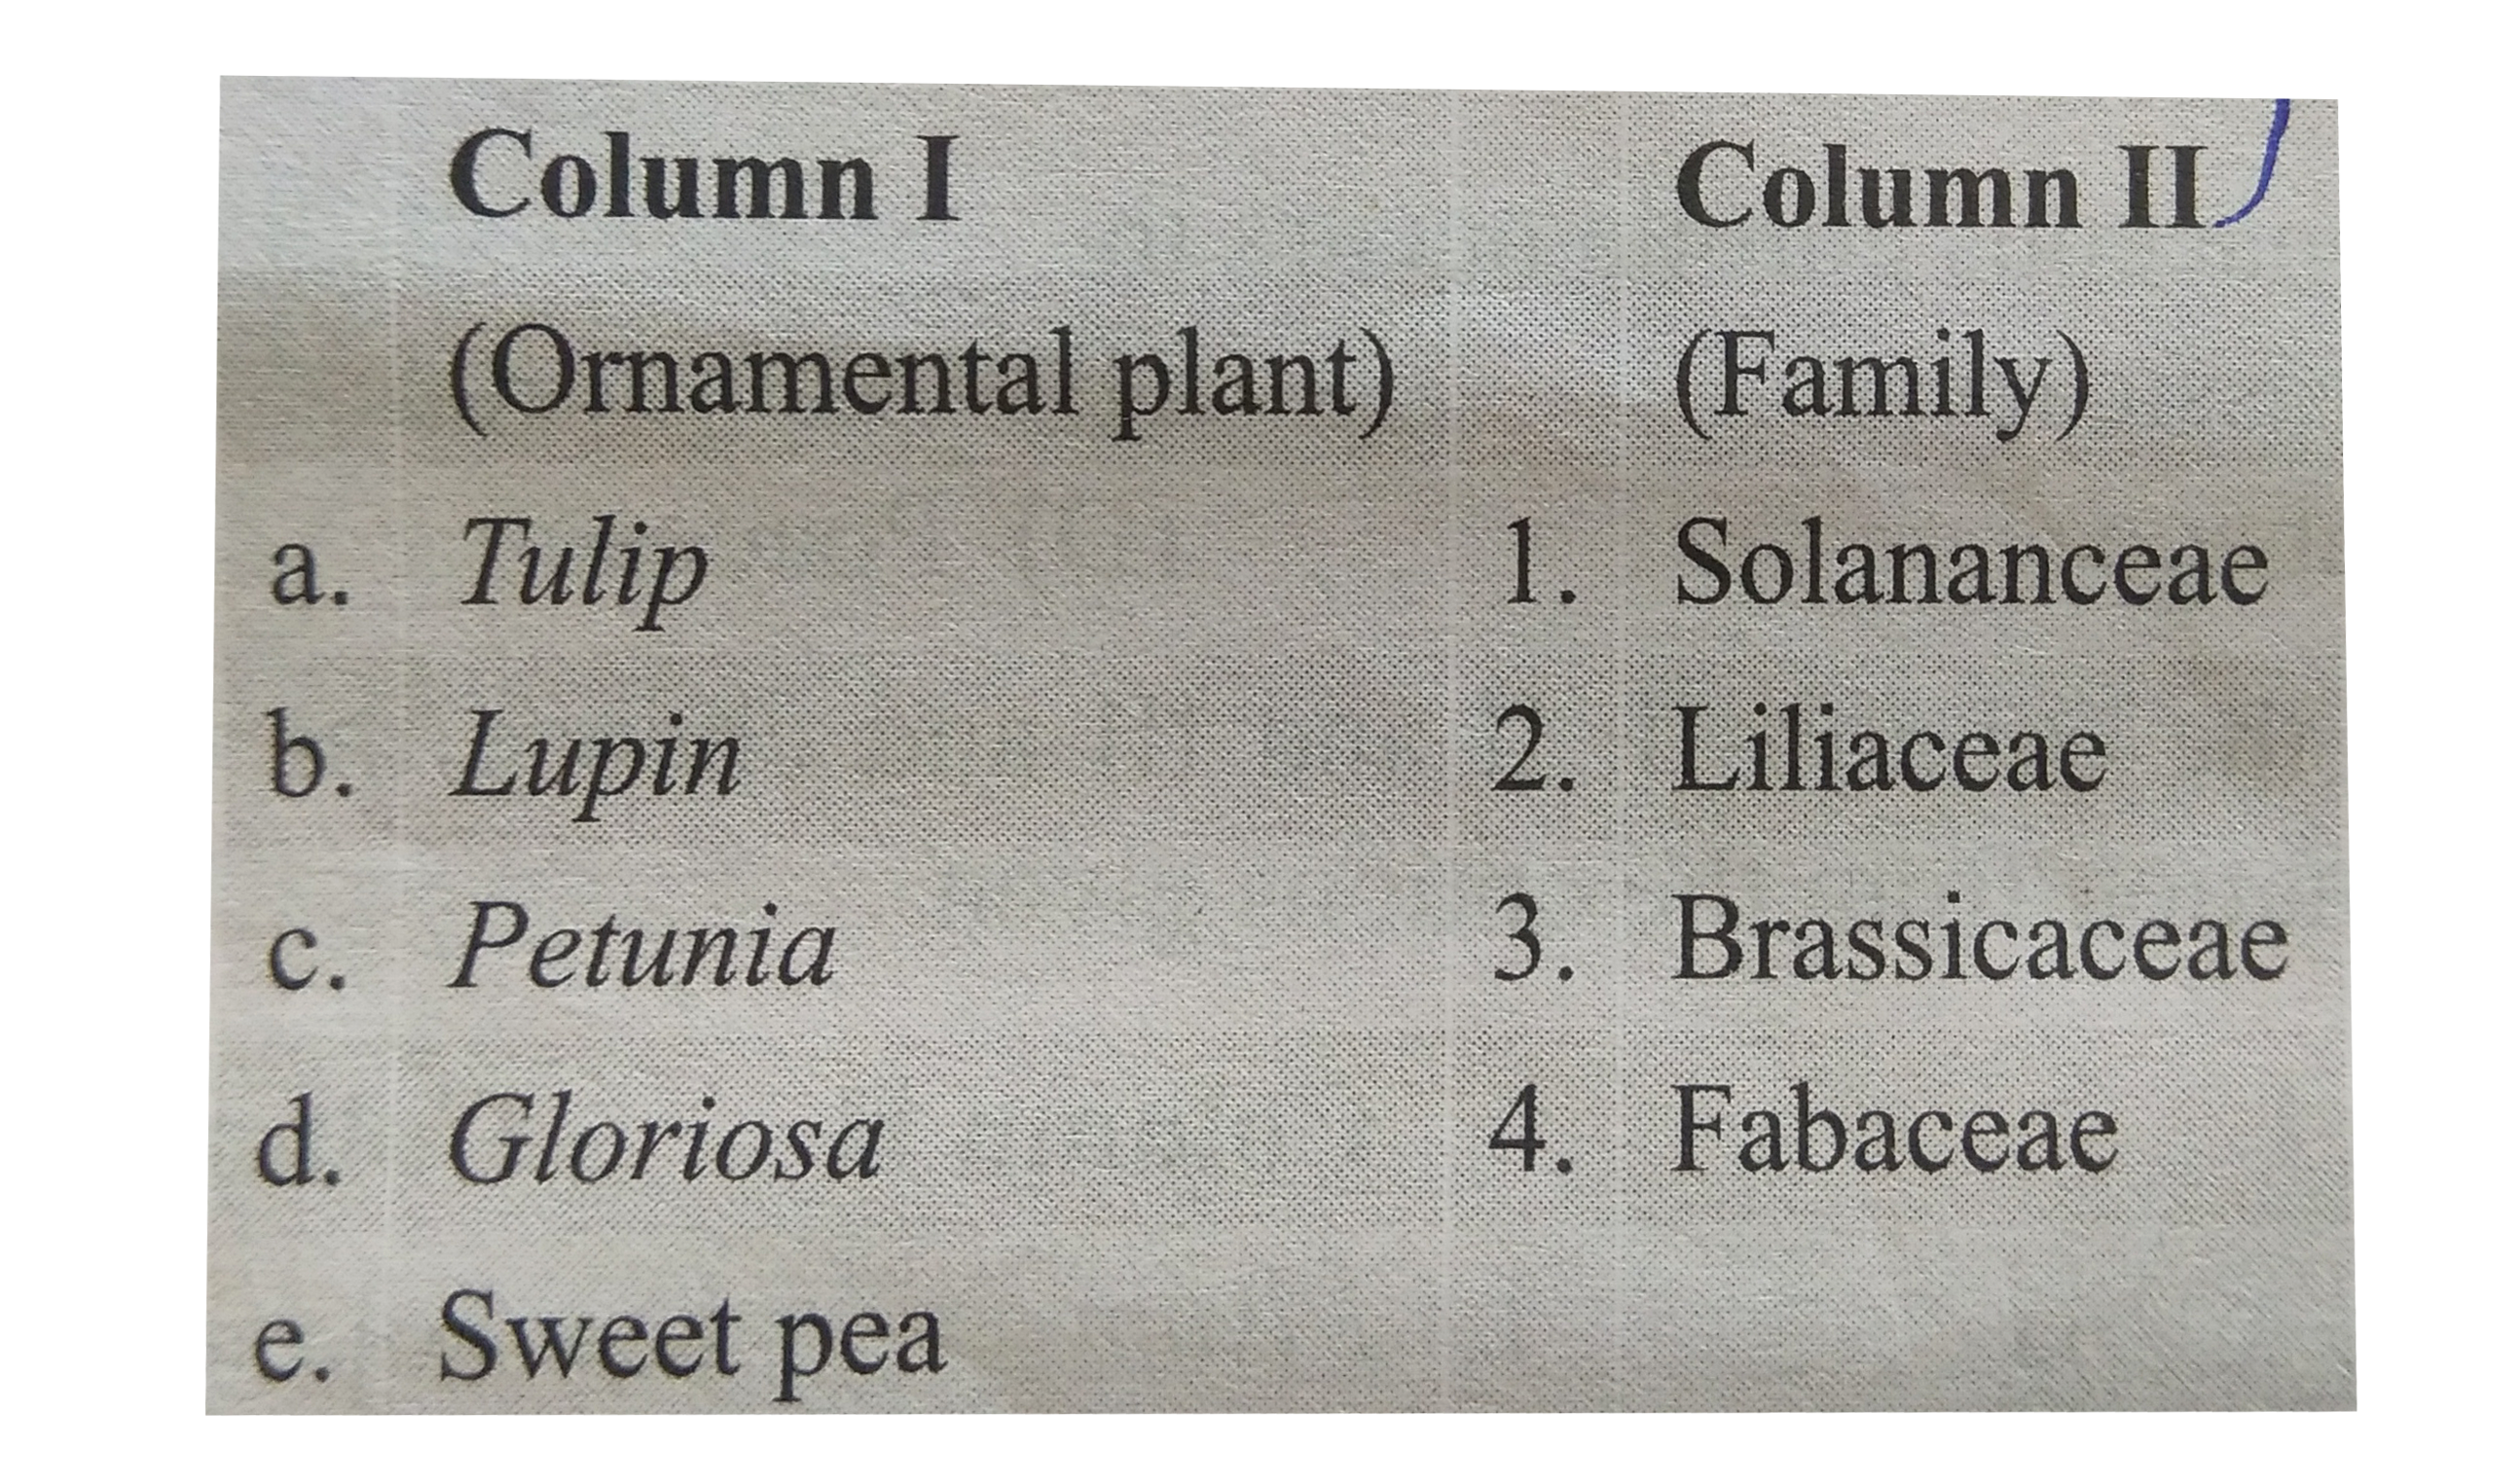 Match the column I and II, and choose the correct combination form the options given